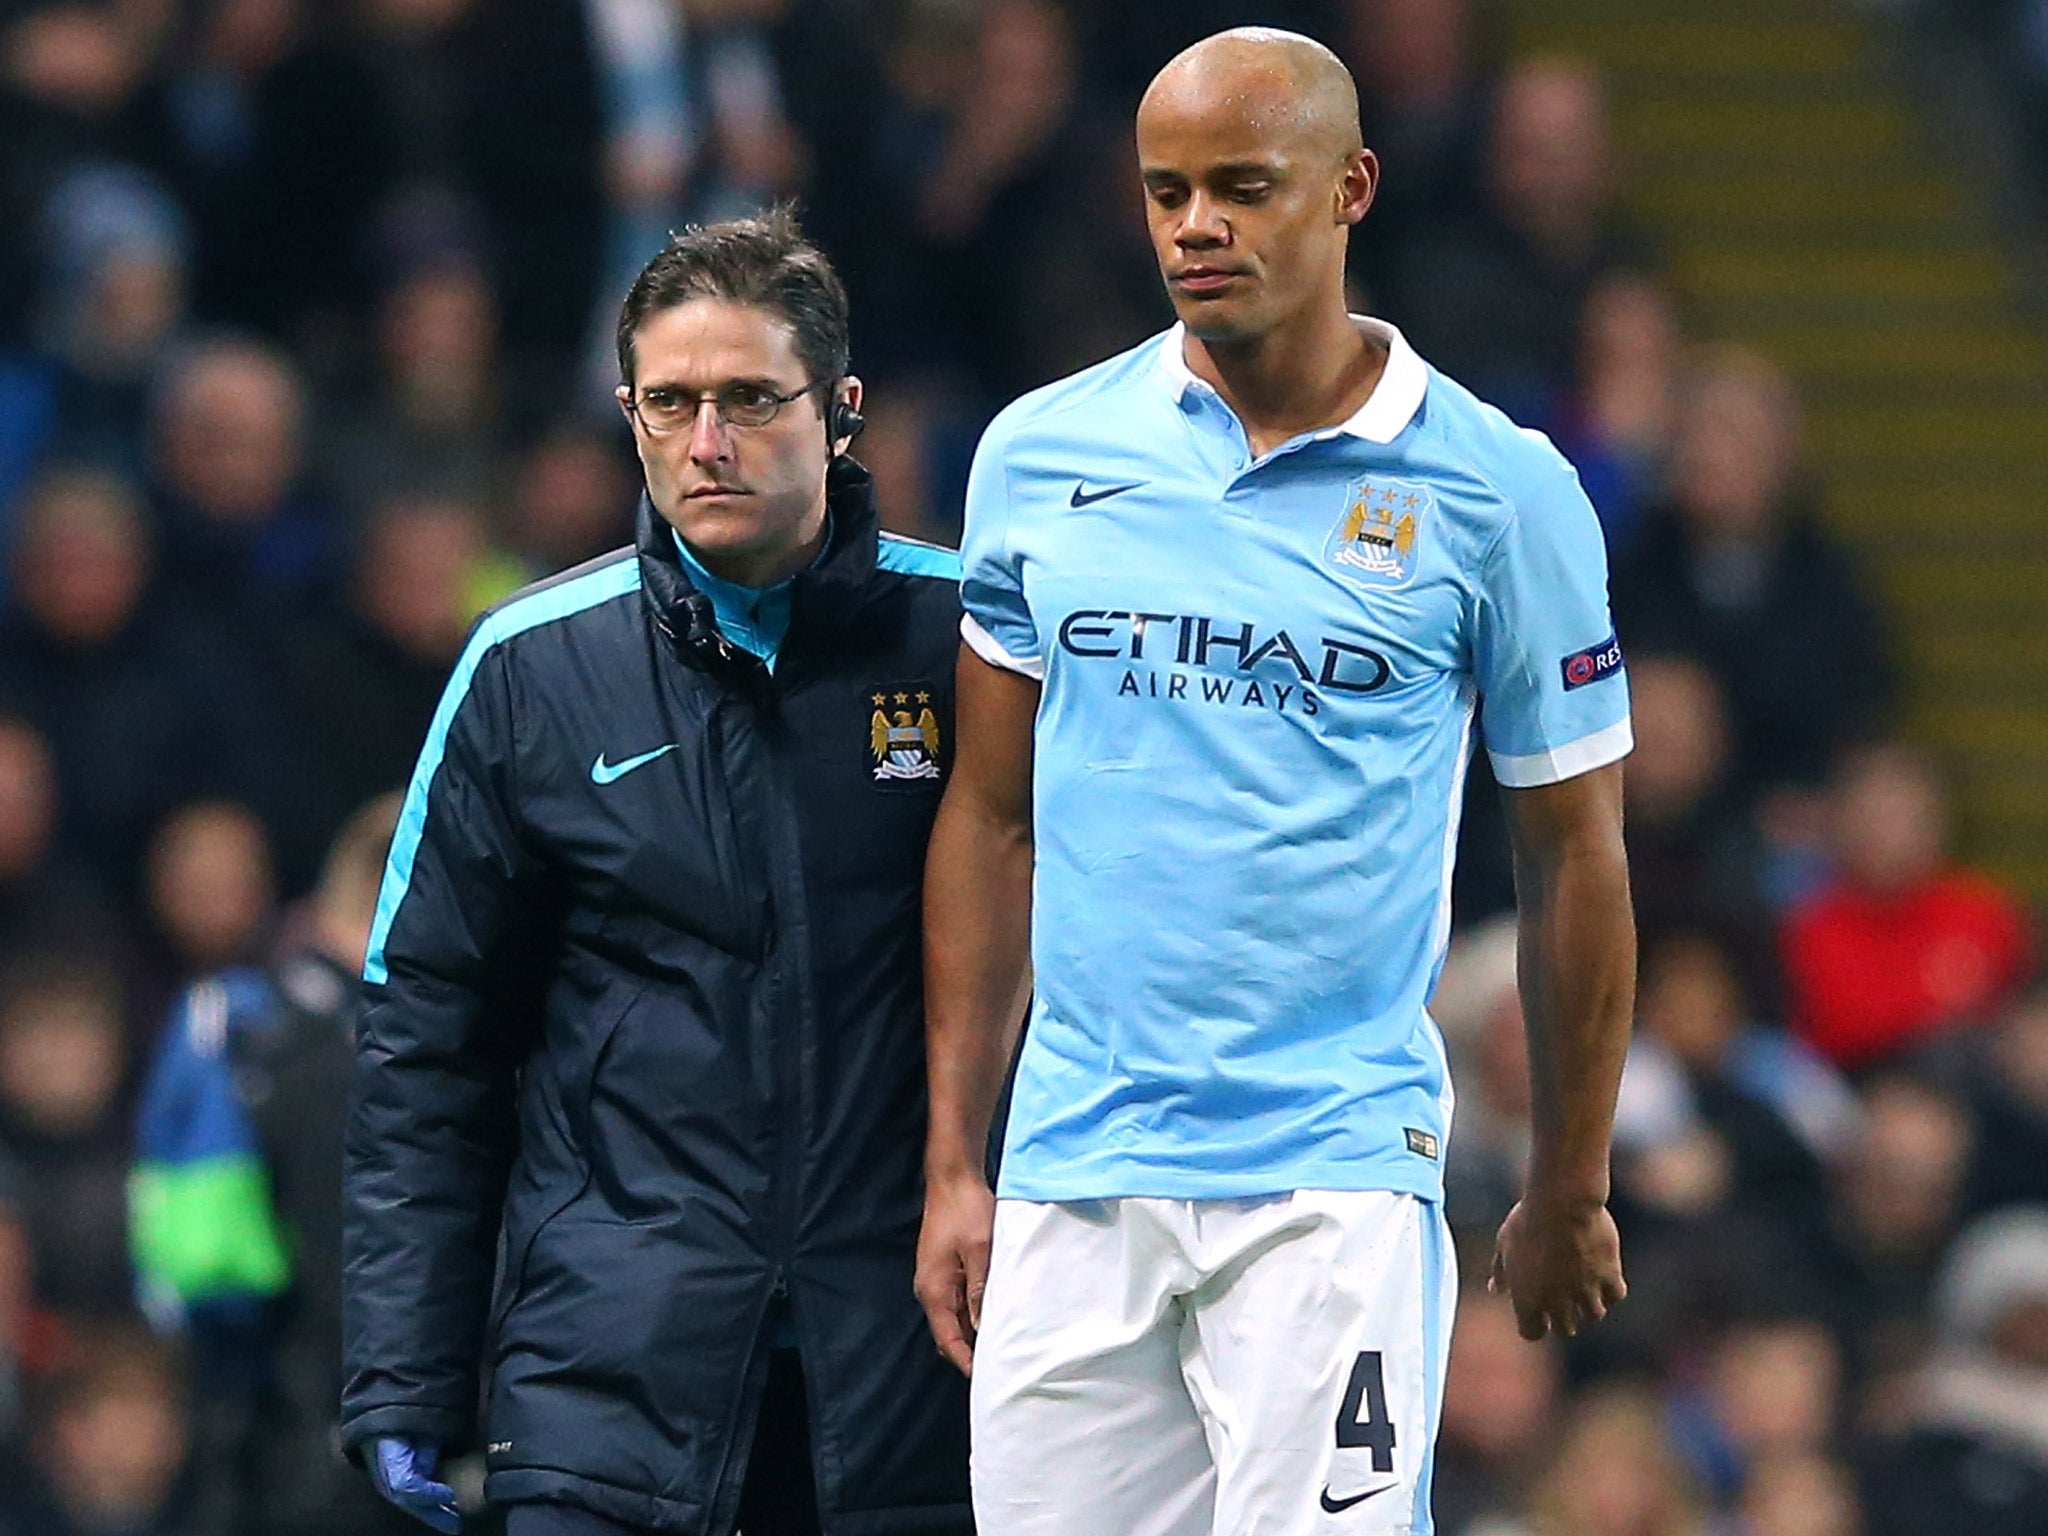 Vincent Kompany could return for Manchester City's Champions League quarter-final tie with PSG